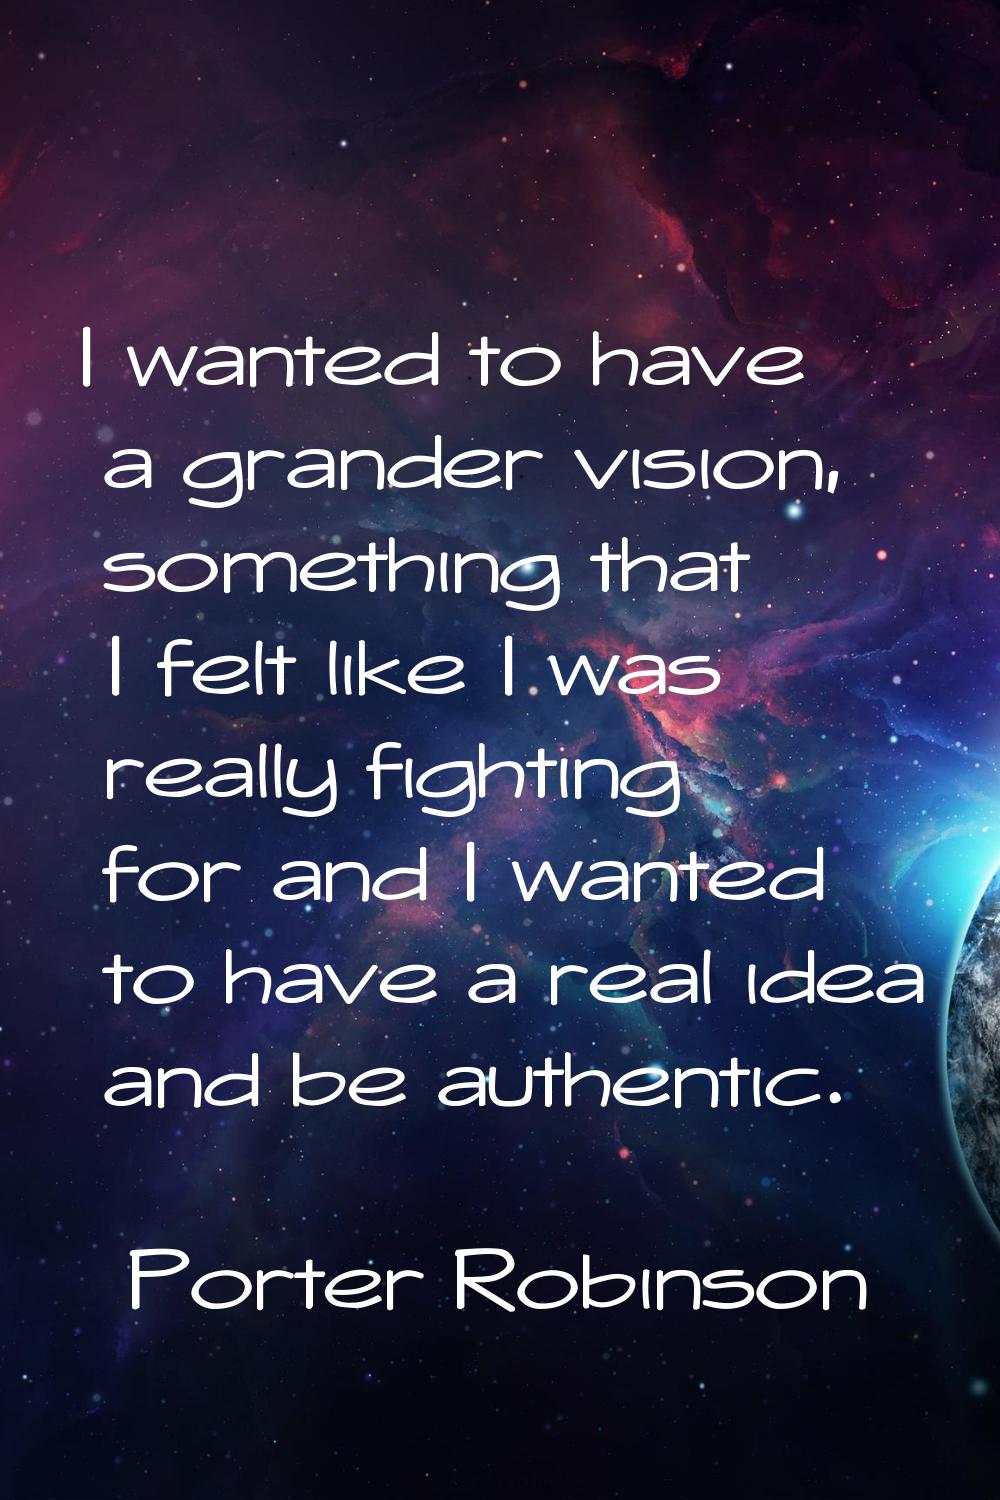 I wanted to have a grander vision, something that I felt like I was really fighting for and I wante